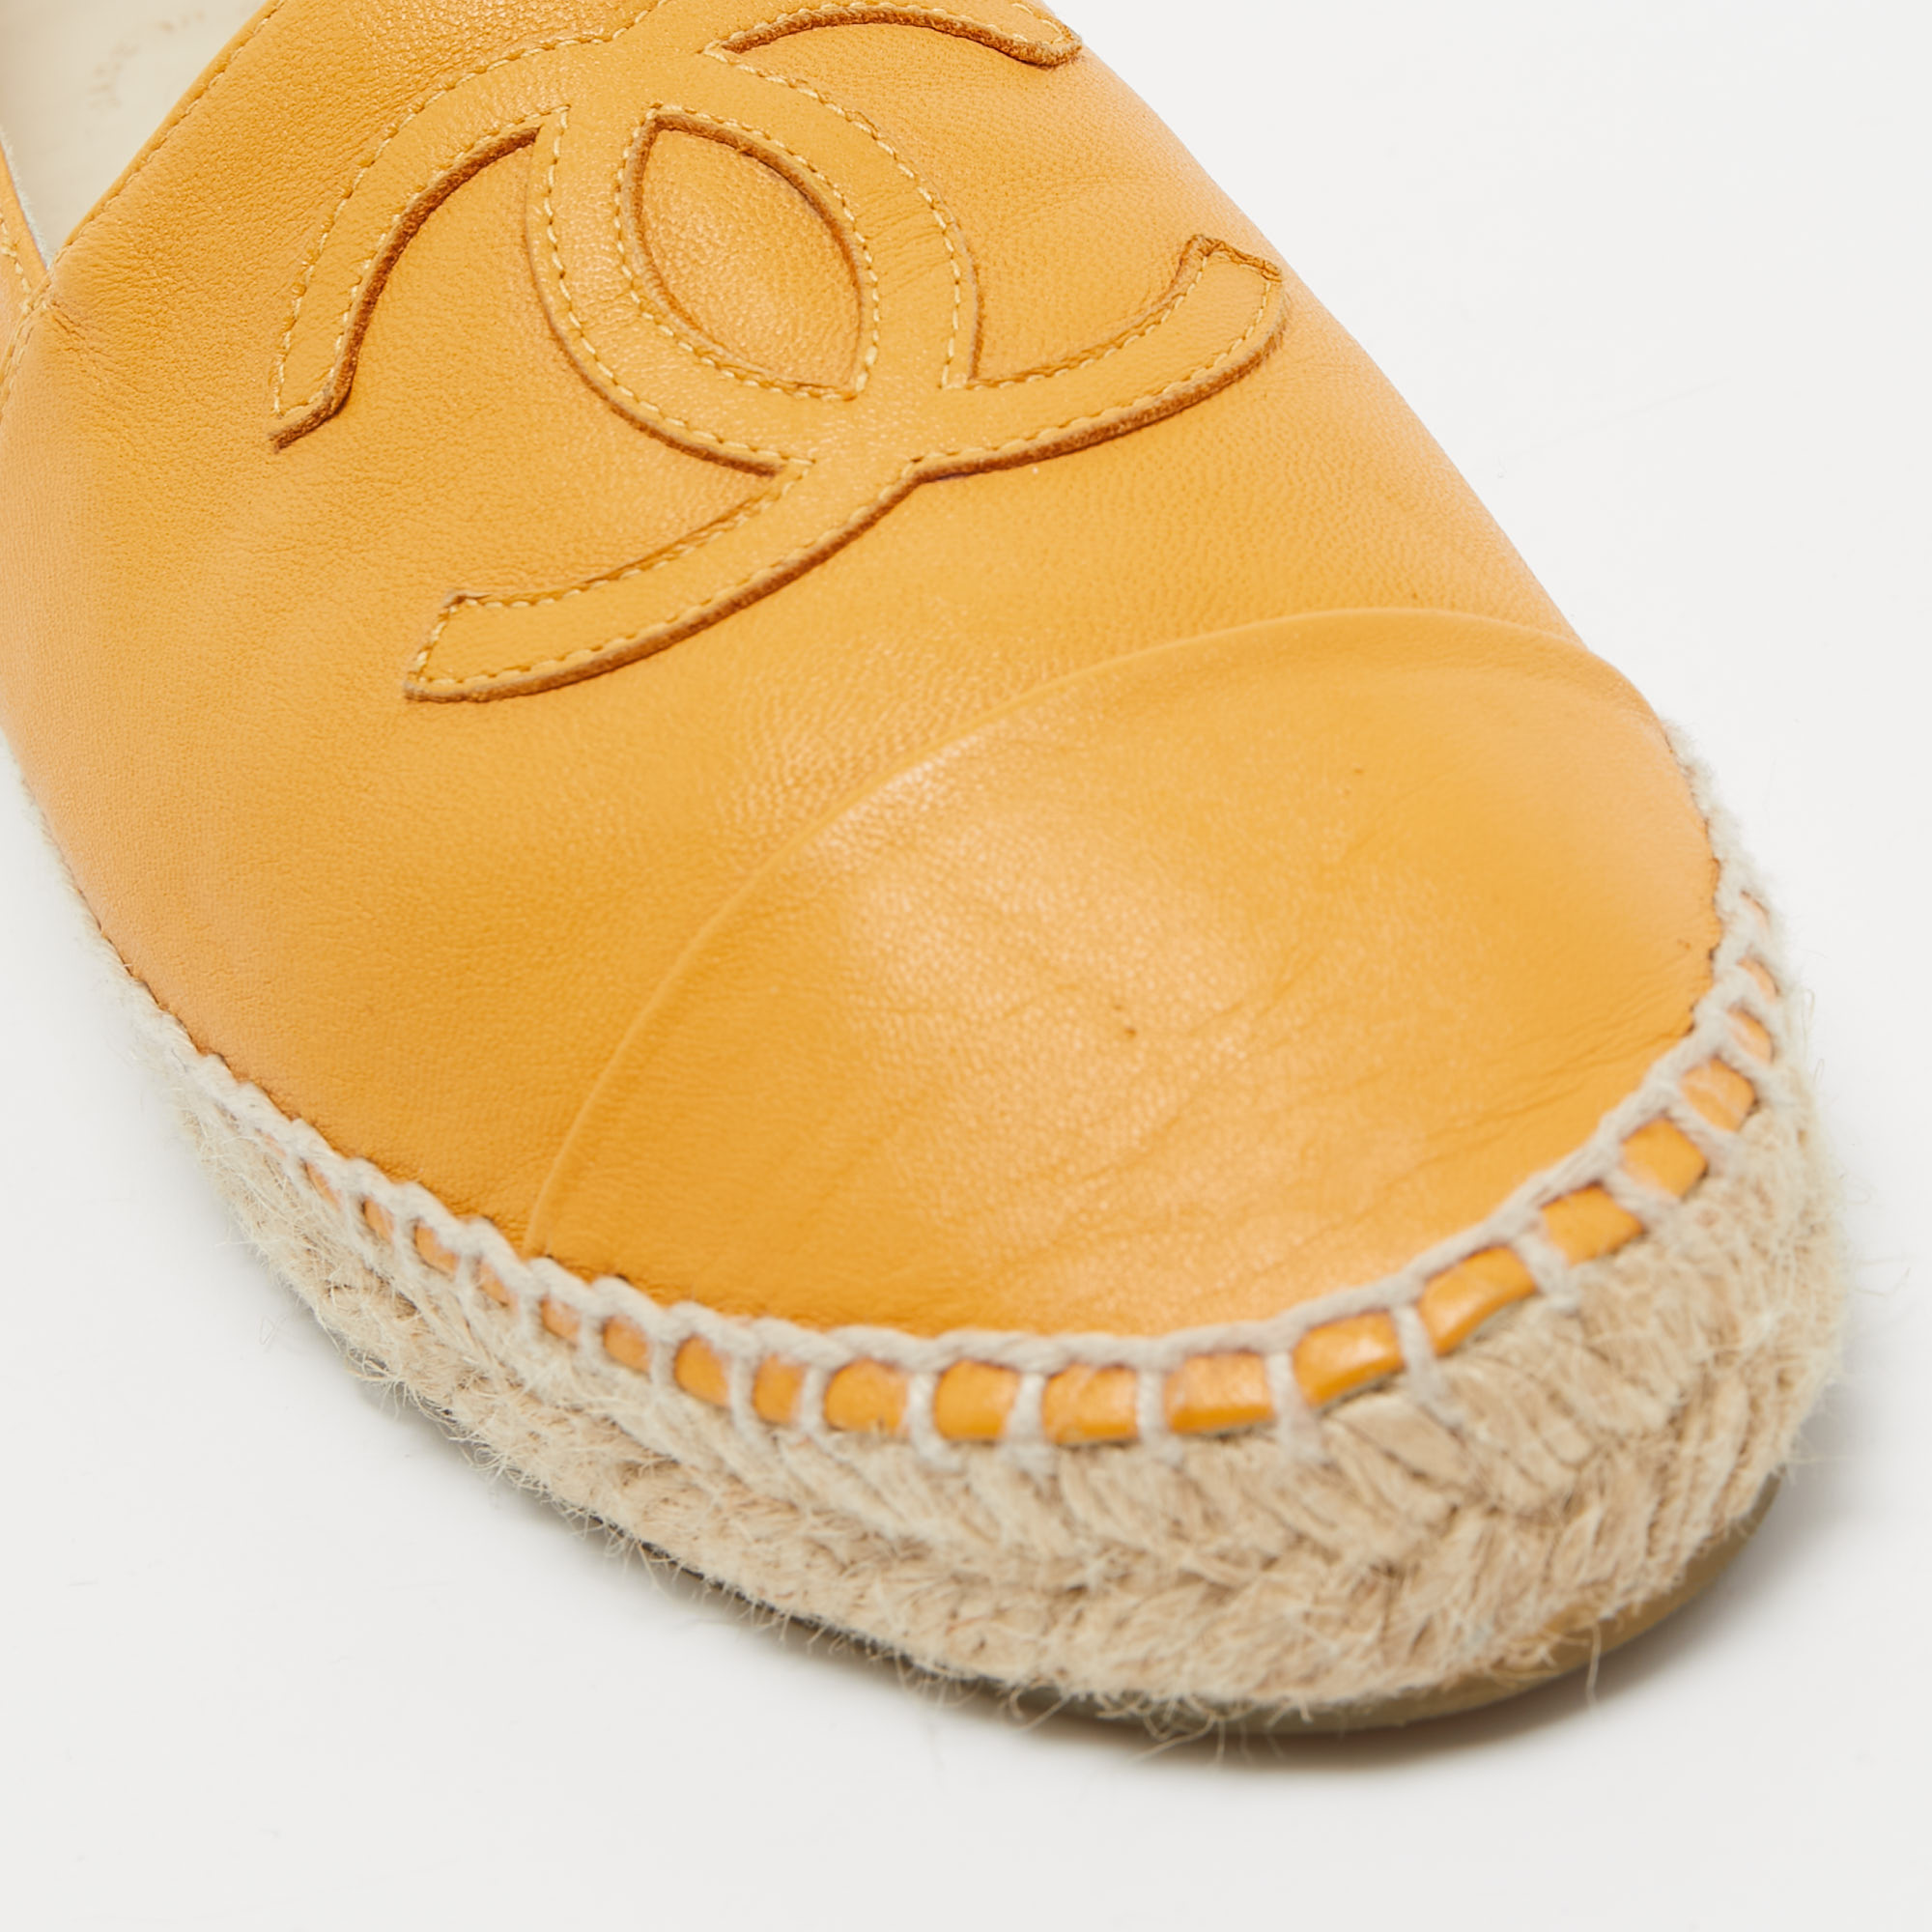 Chanel Yellow Leather CC Espadrille Flats Size 37